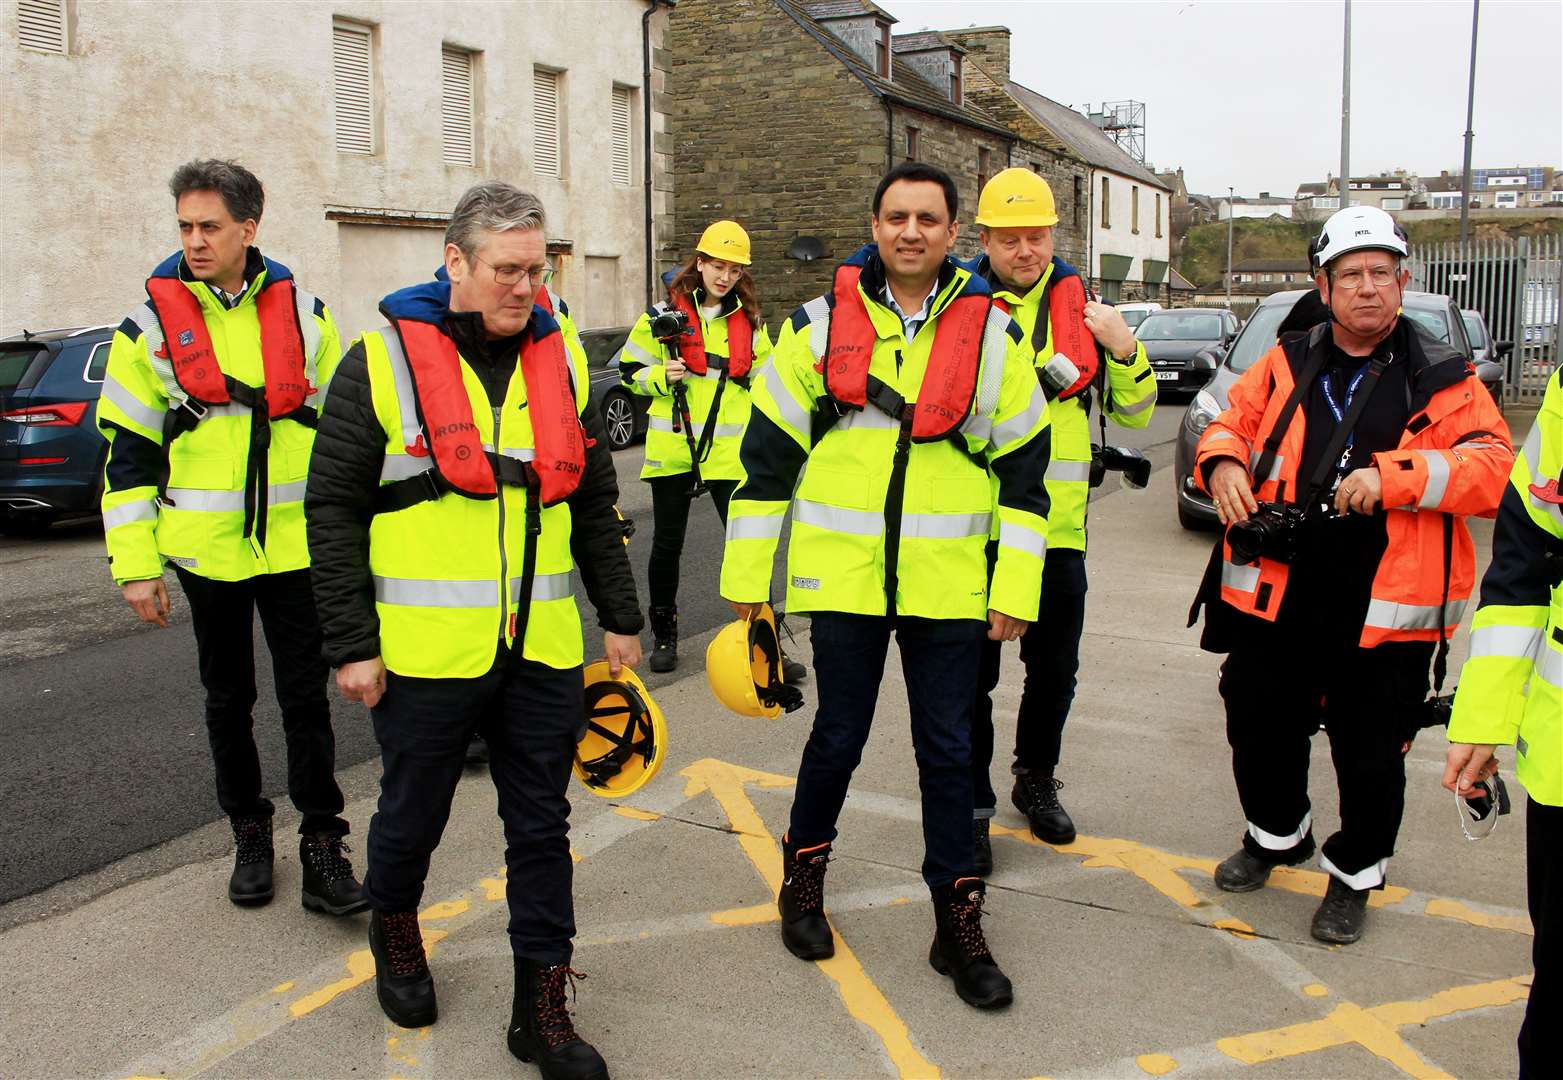 Anas Sarwar (centre) with Ed Miliband, Sir Keir Starmer and others on their way to a crew transfer vessel for a trip to the Beatrice offshore wind farm during a visit to Wick last year. Picture: Alan Hendry